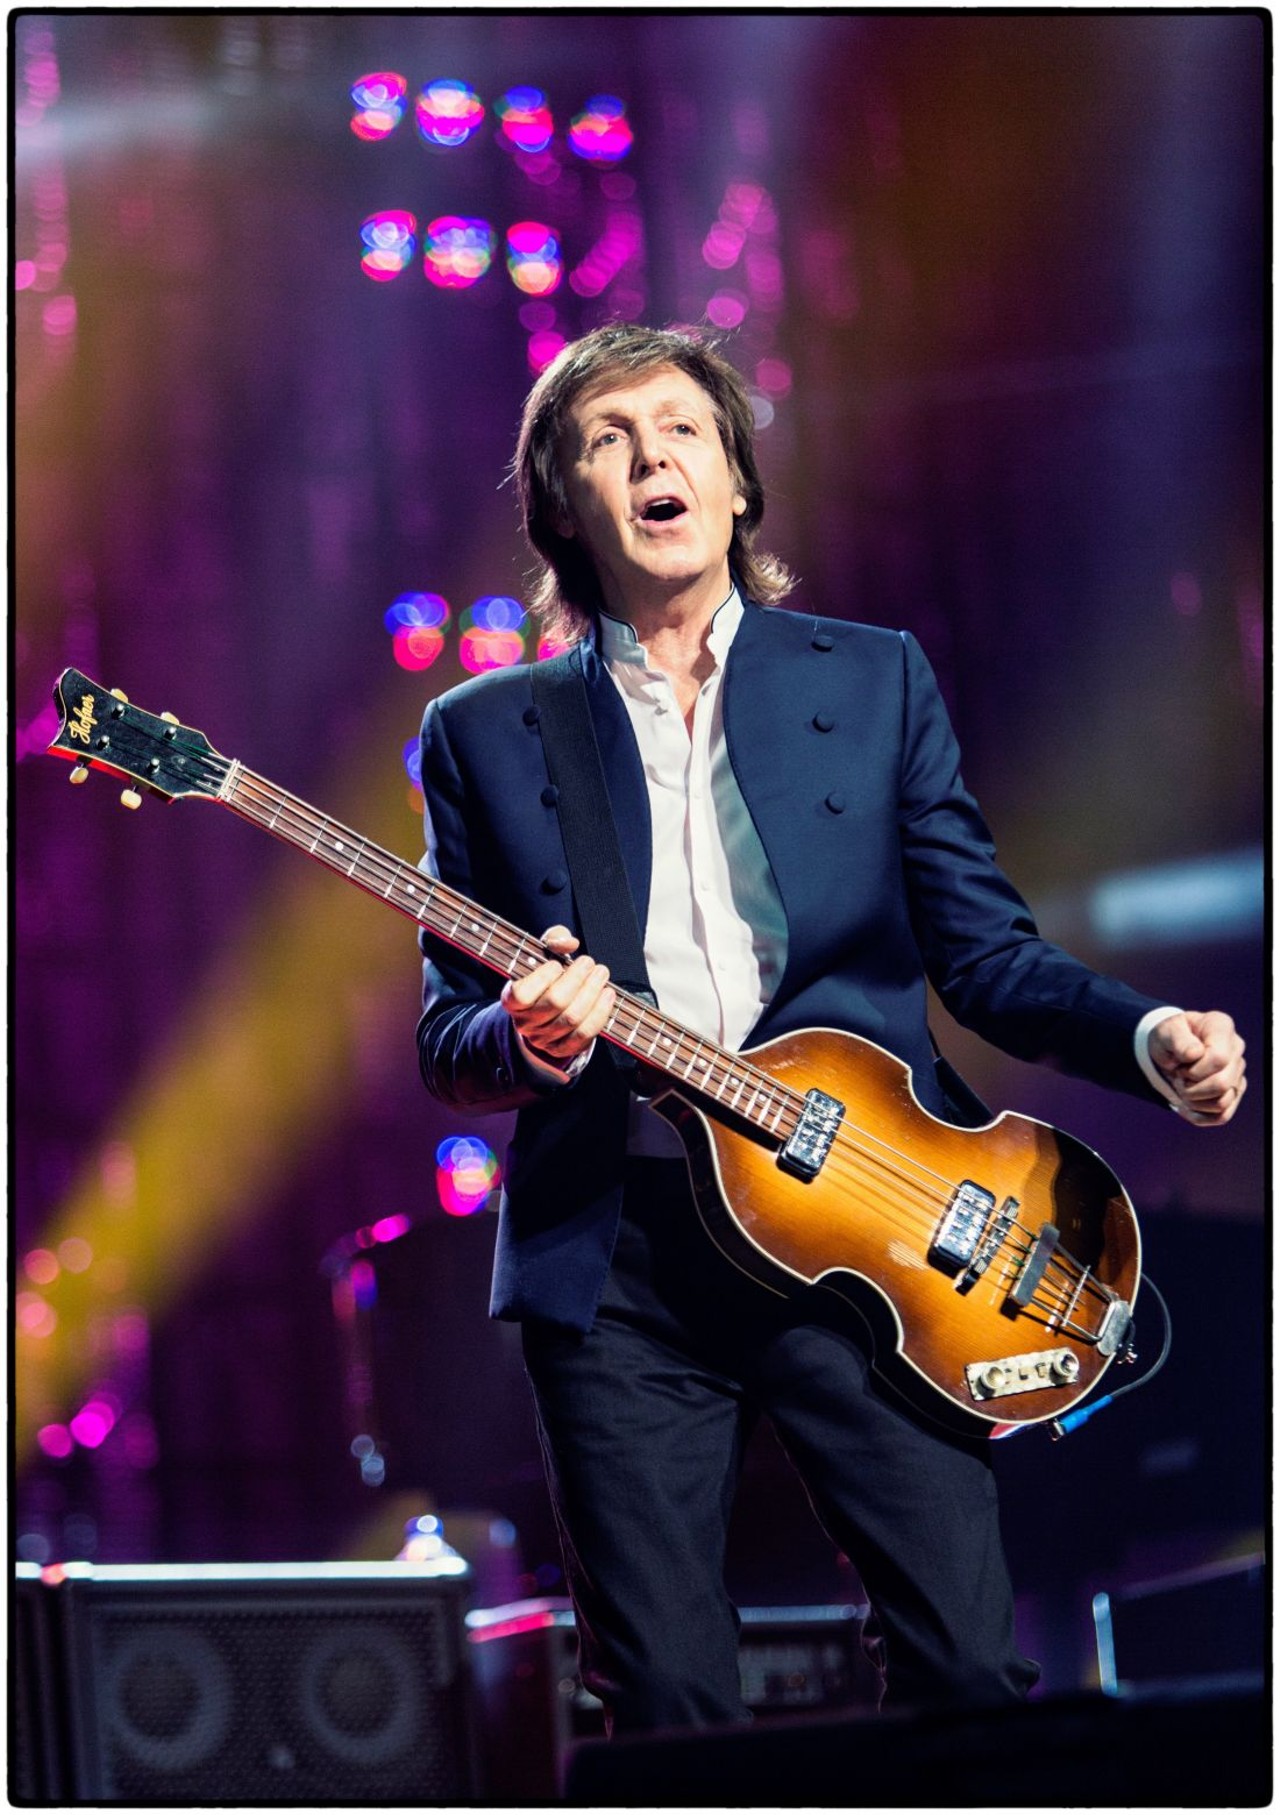 Sun, 10/1-Mon, 10/2
Paul McCartney 
@ Little Caesars Arena 
Sir Paul McCartney just played a jam-packed show at Joe Louis Arena in 2015, but a two-date stop at the newly opened Little Caesars Arena is more than welcome. The former Beatle has been touring his One on One show over the last year and we&#146;re excited to hear his classic tracks performed at the new arena &#151; it&#146;ll be something of a spiritual cleansing after those six Kid Rock shows. We&#146;re counting on hearing tunes like &#147;Hey Jude,&#148; &#147;Helter Skelter,&#148; and a few other timeless tracks. Is it possible McCartney might bring out a couple Motown legends like, say, Stevie Wonder? Hey, a girl can dream. 
Doors open at 7 p.m.; 2645 Woodward Ave,. Detroit; 313-471-7000; olympiaentertainment.com; Tickets start at $59.60. 